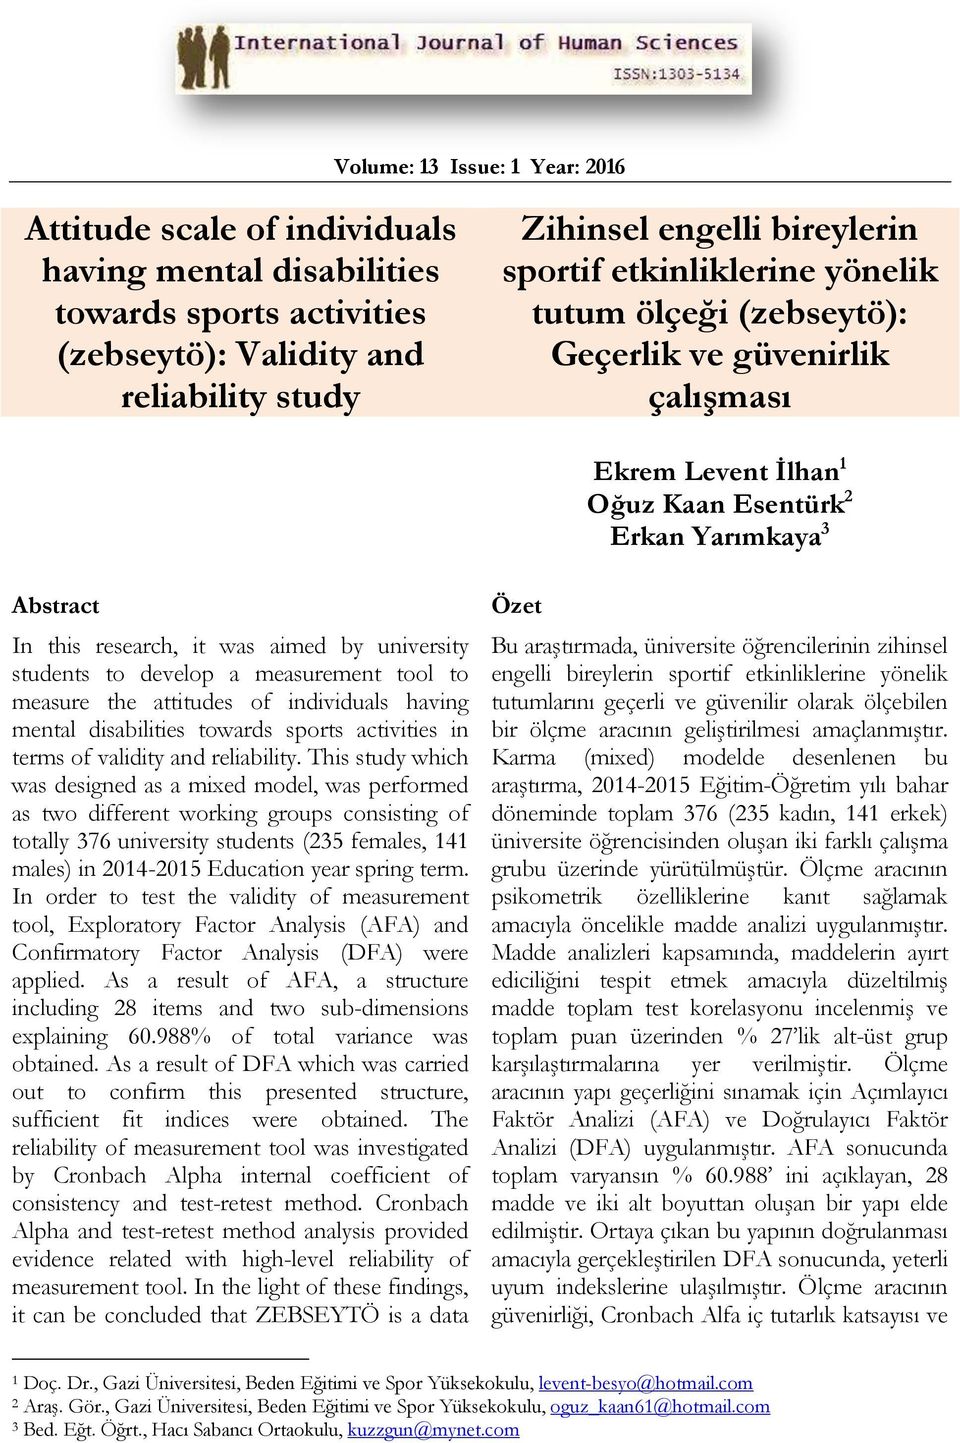 students to develop a measurement tool to measure the attitudes of individuals having mental disabilities towards sports activities in terms of validity and reliability.